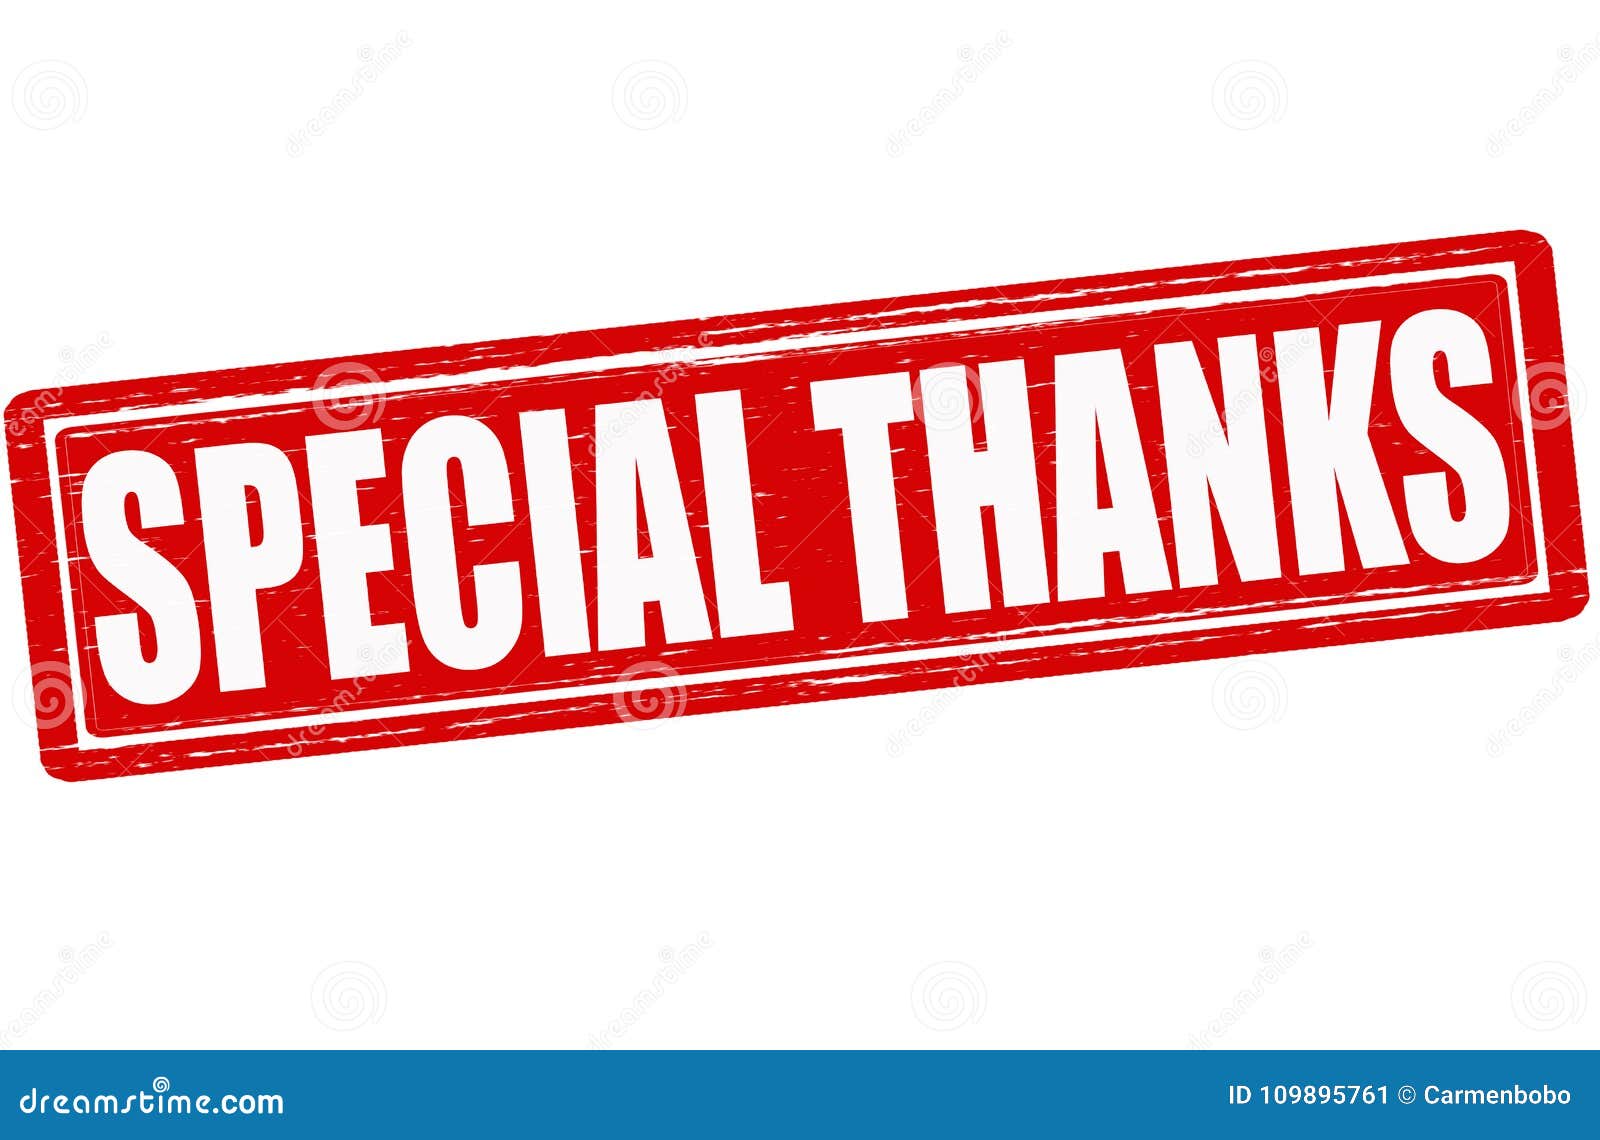 Special thanks to. Special thanks. Special thanks to credits. Special thanks титры.